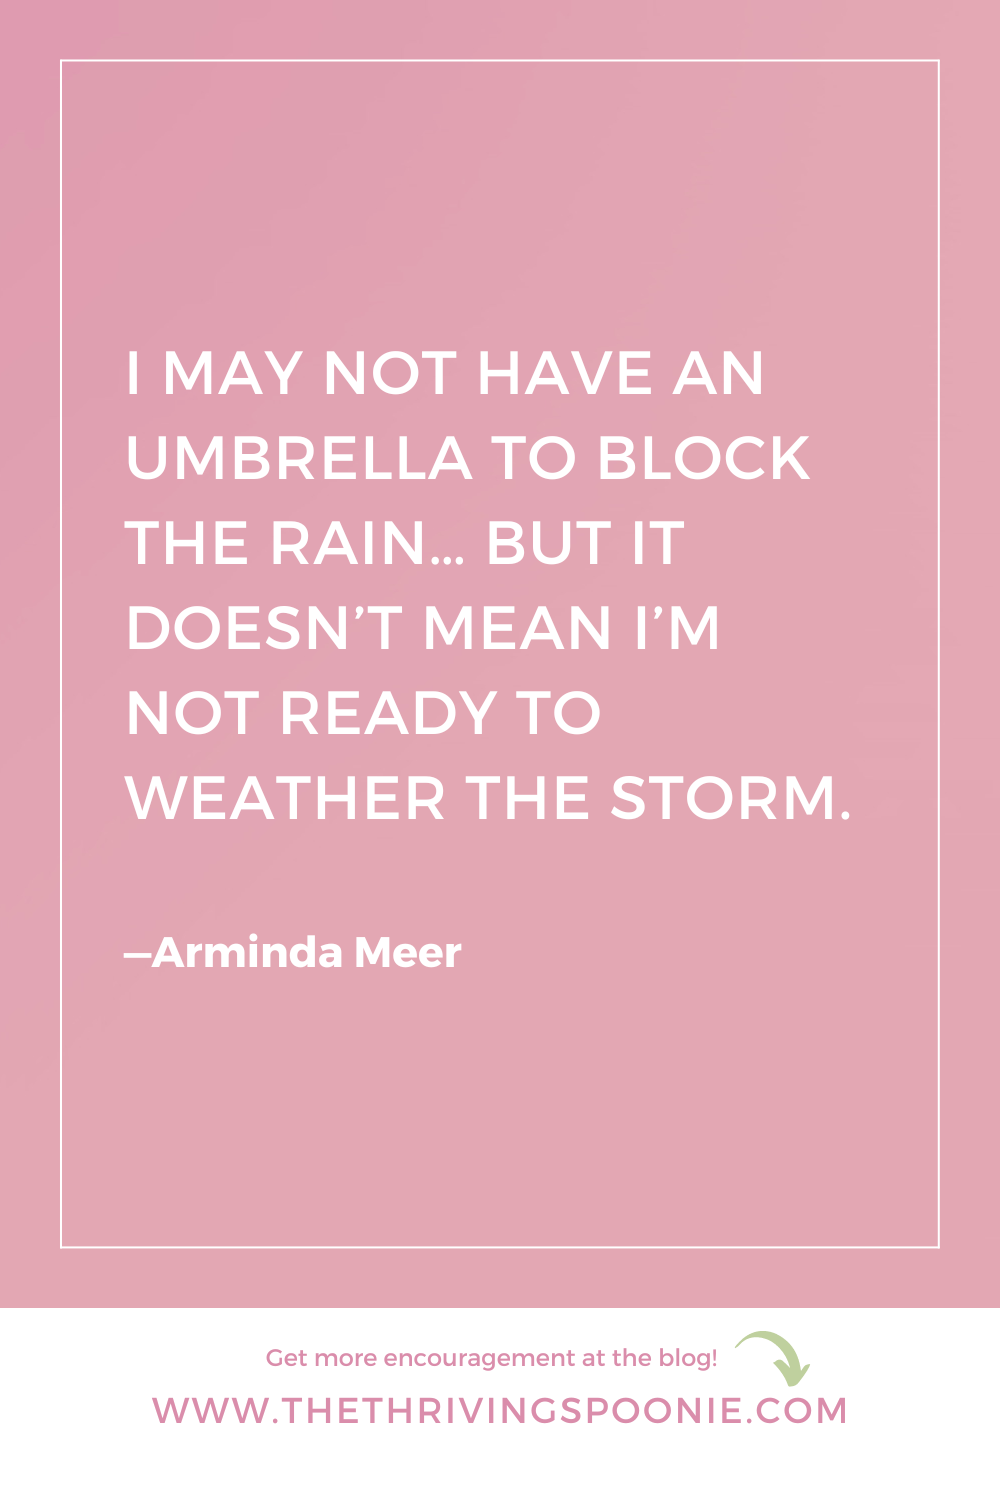 Arminda Meer Quote from 35 Chronic Illness Quotes to Give You Hope & Encouragement